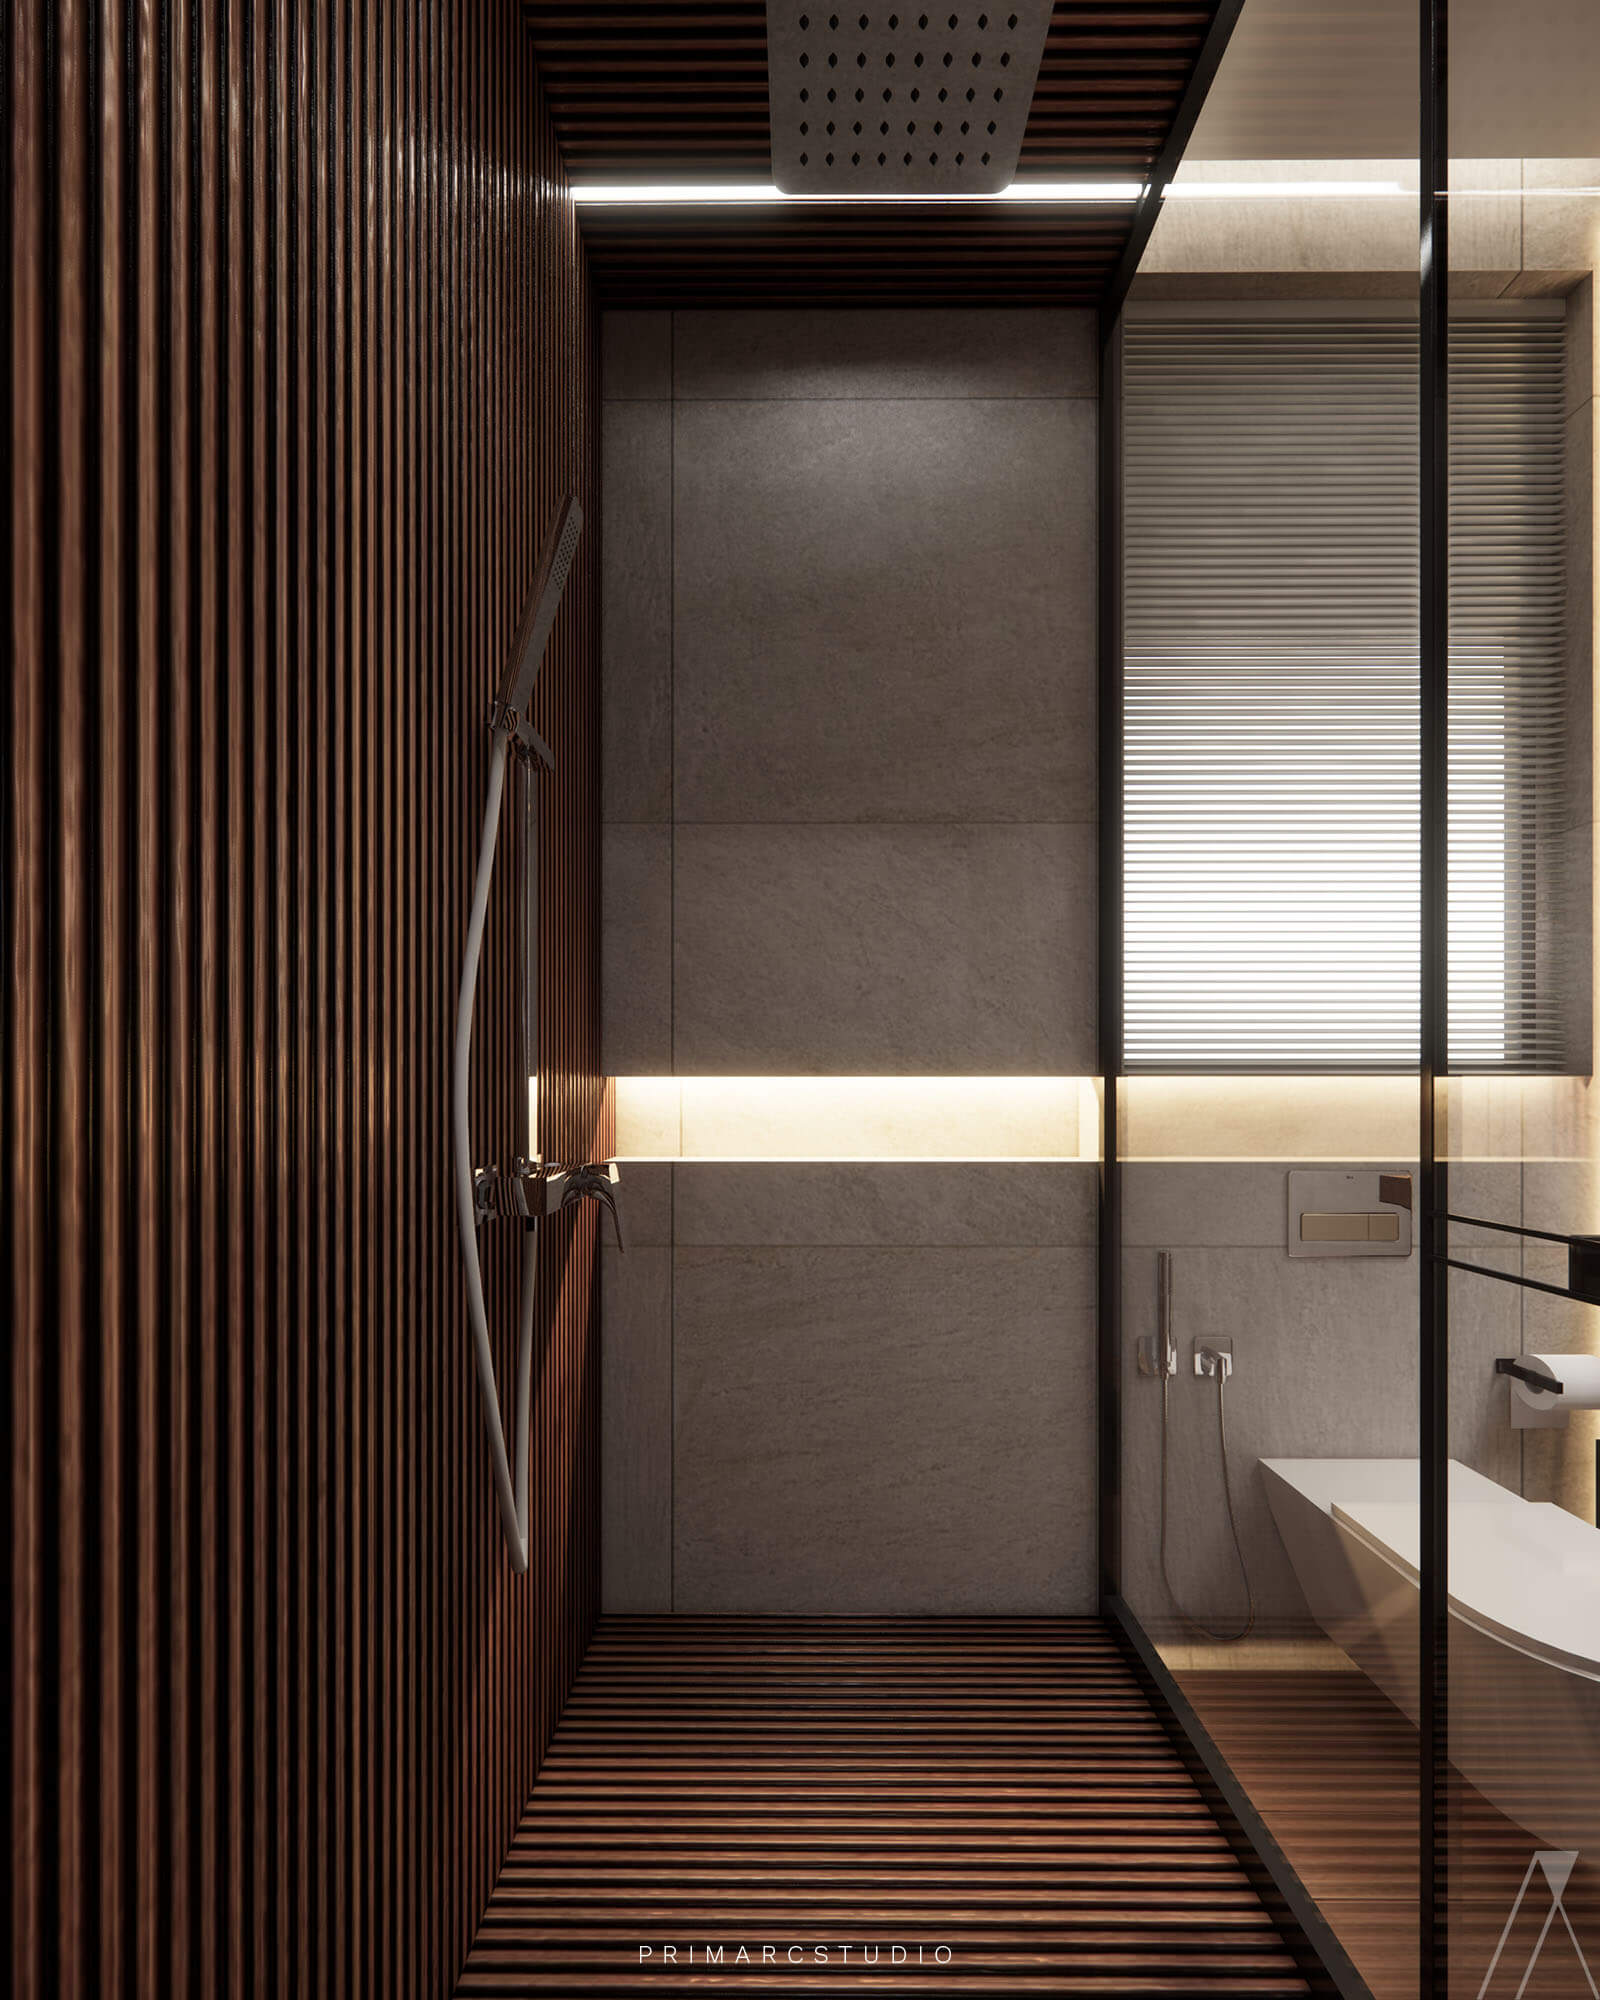 Washroom interior design in wooden and neutral colors - Shower area